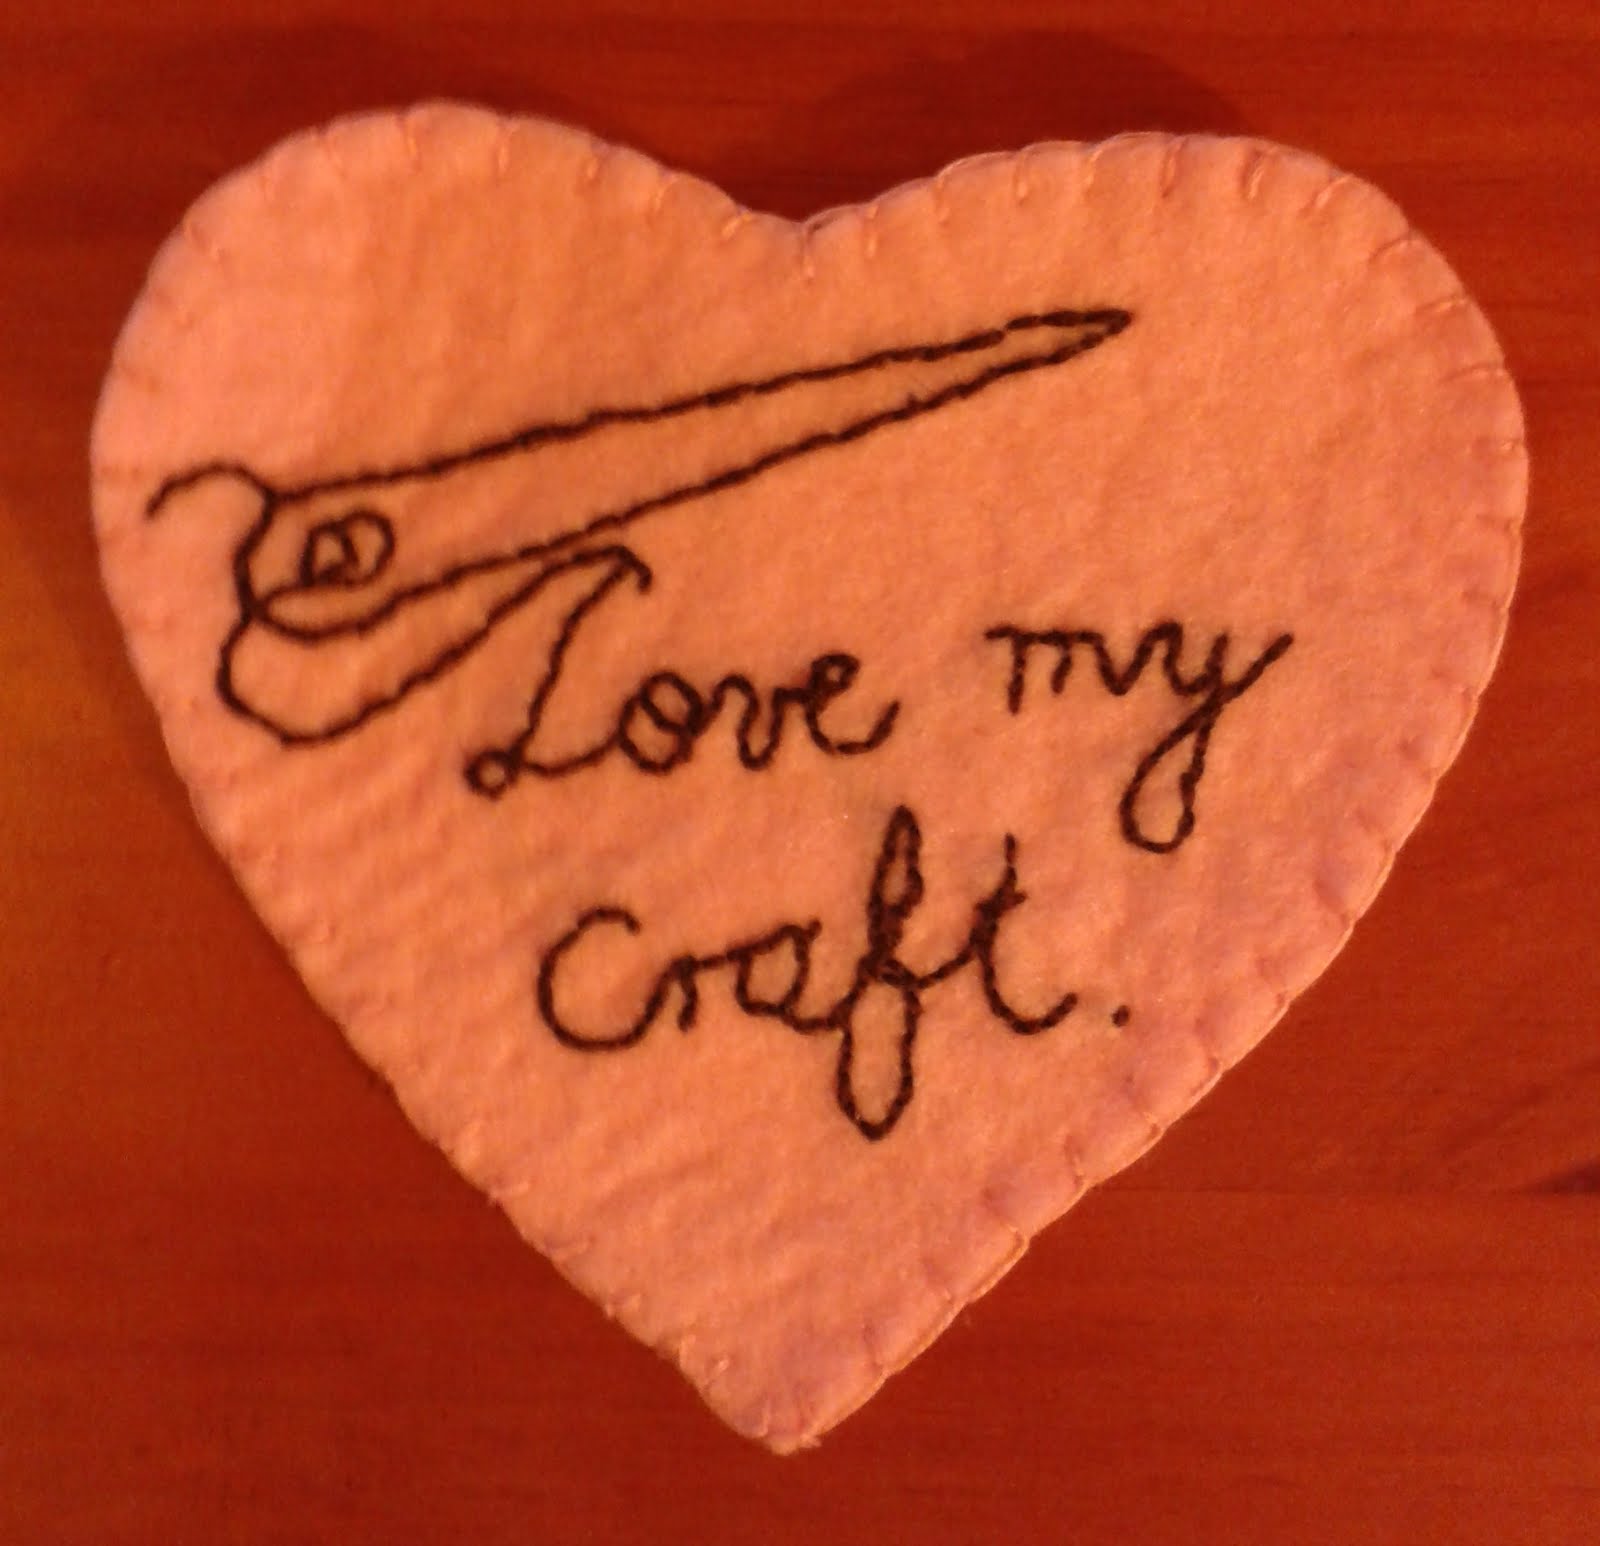 Craftivist "Wear Your Heart On Your Sleeve" project